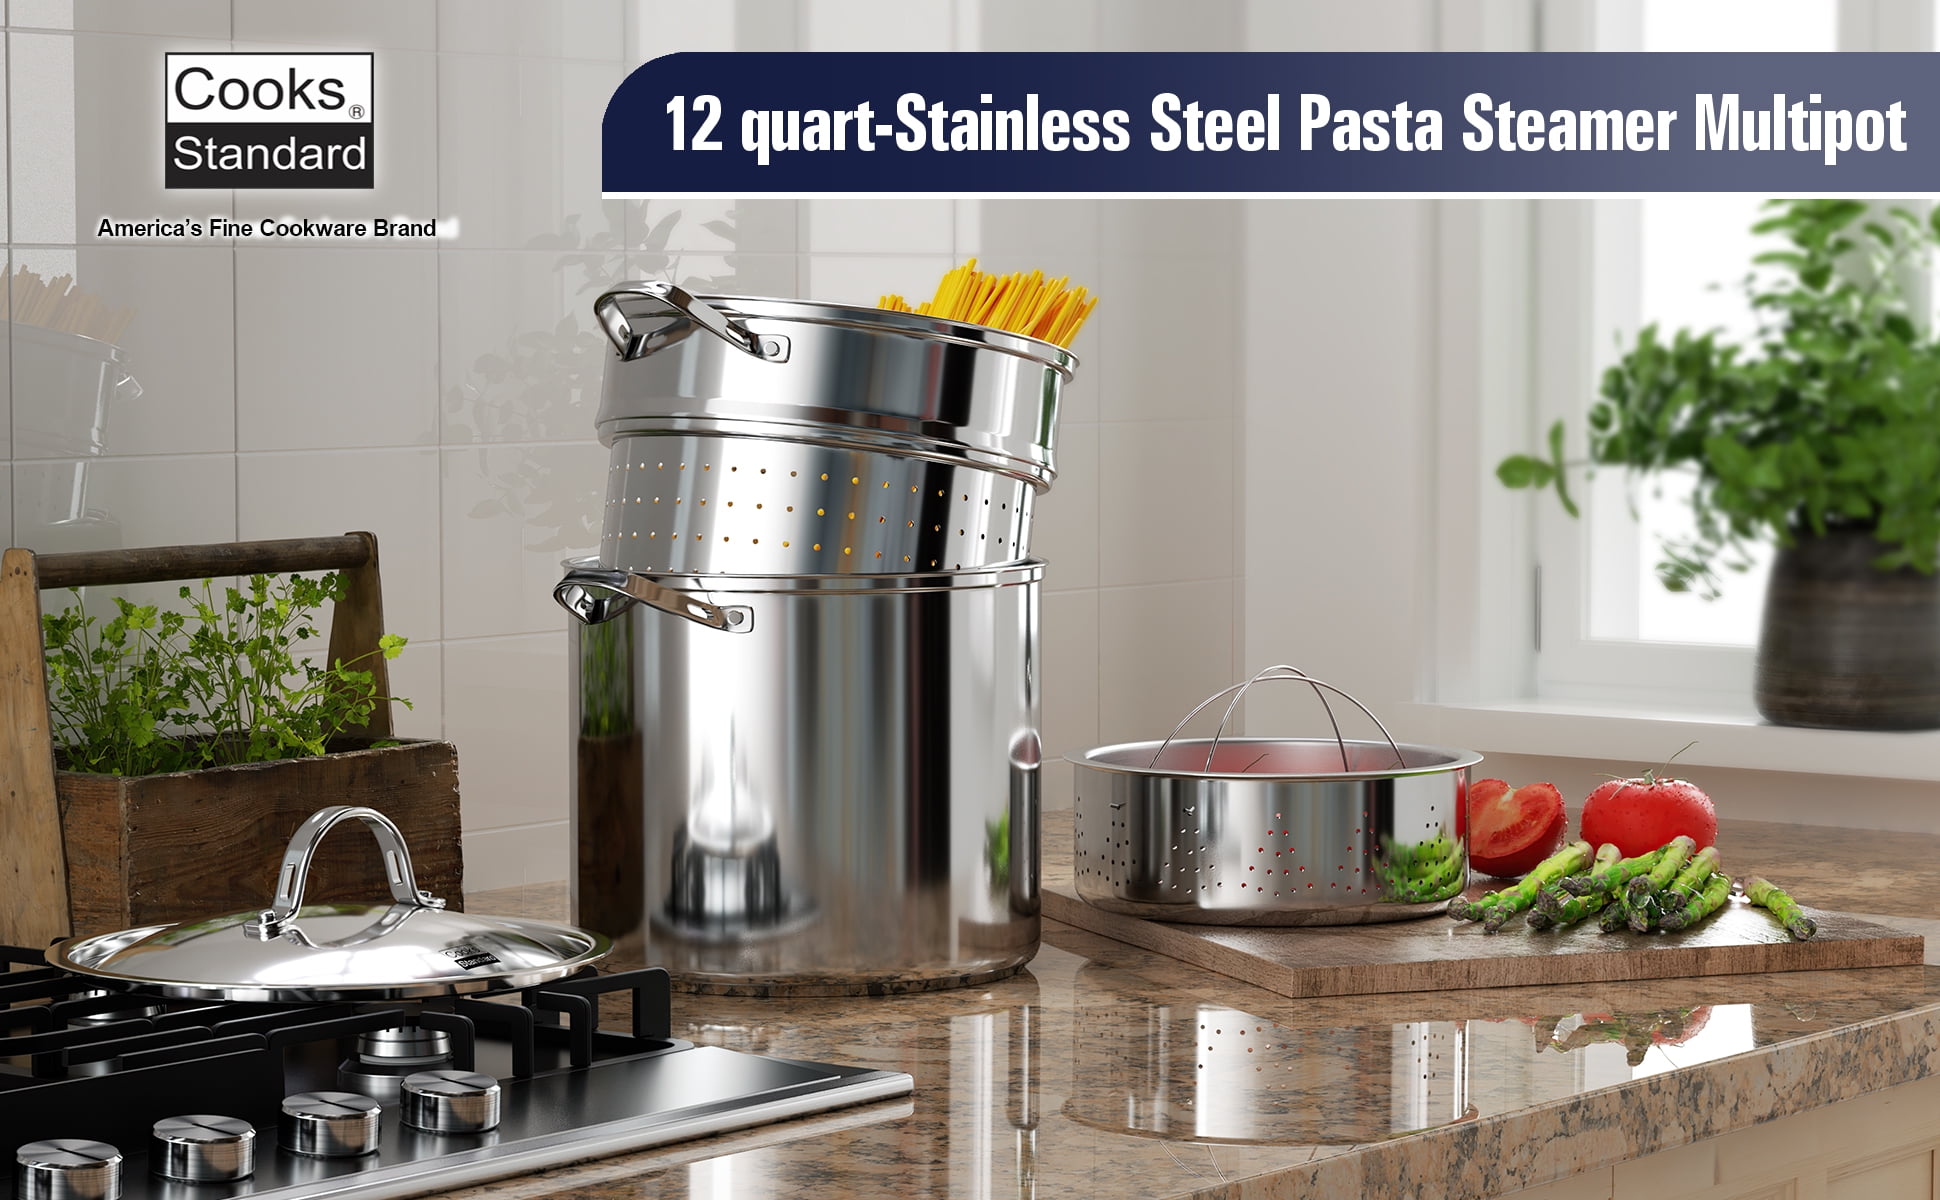  All-Clad Specialty Stainless Steel Stockpot, Multi-Pot with  Strainer 3 Piece, 12 Quart Induction Oven Broiler Safe 500F Strainer, Pasta  Strainer with Handle, Pots and Pans Silver: Pans: Home & Kitchen